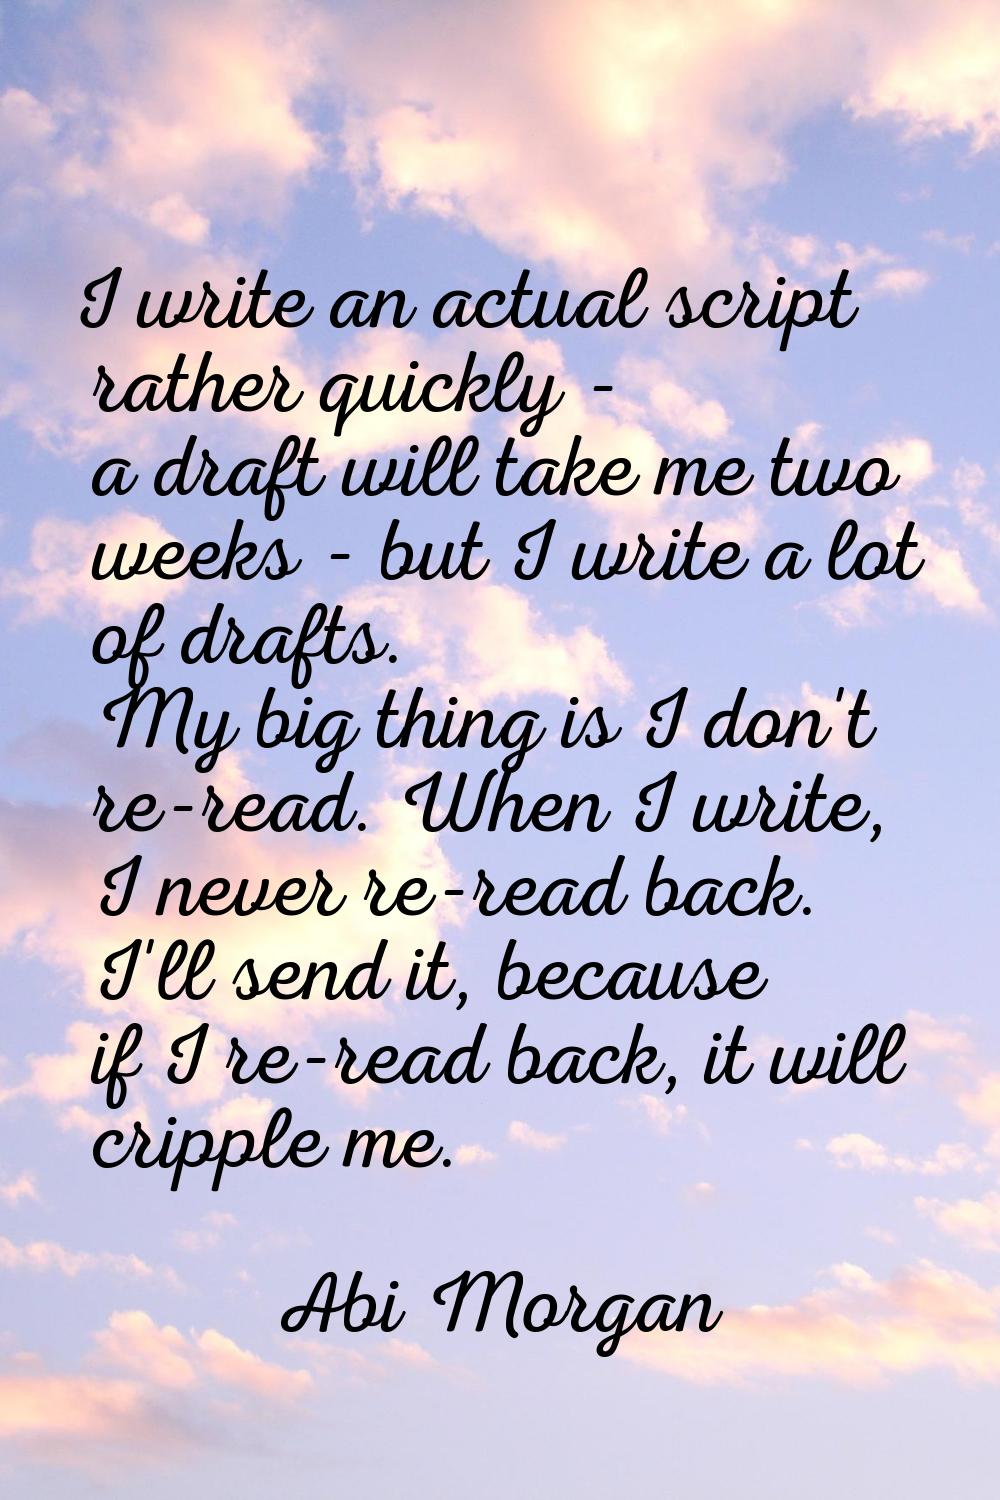 I write an actual script rather quickly - a draft will take me two weeks - but I write a lot of dra